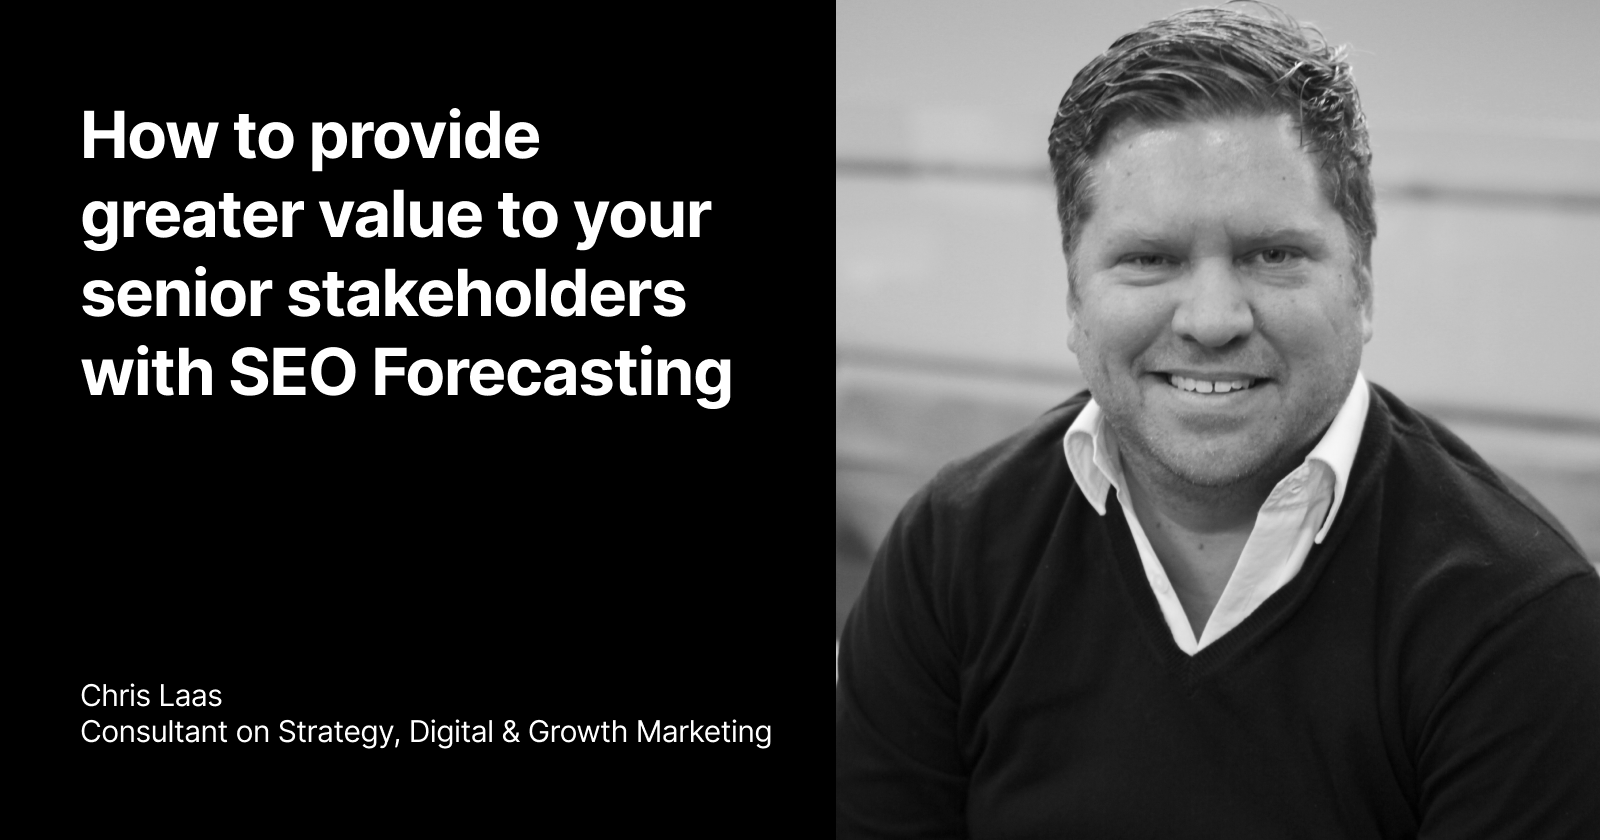 SEO Forecasting: 3 Unique Ways To Prove The Value Of SEO To Clients & Stakeholders